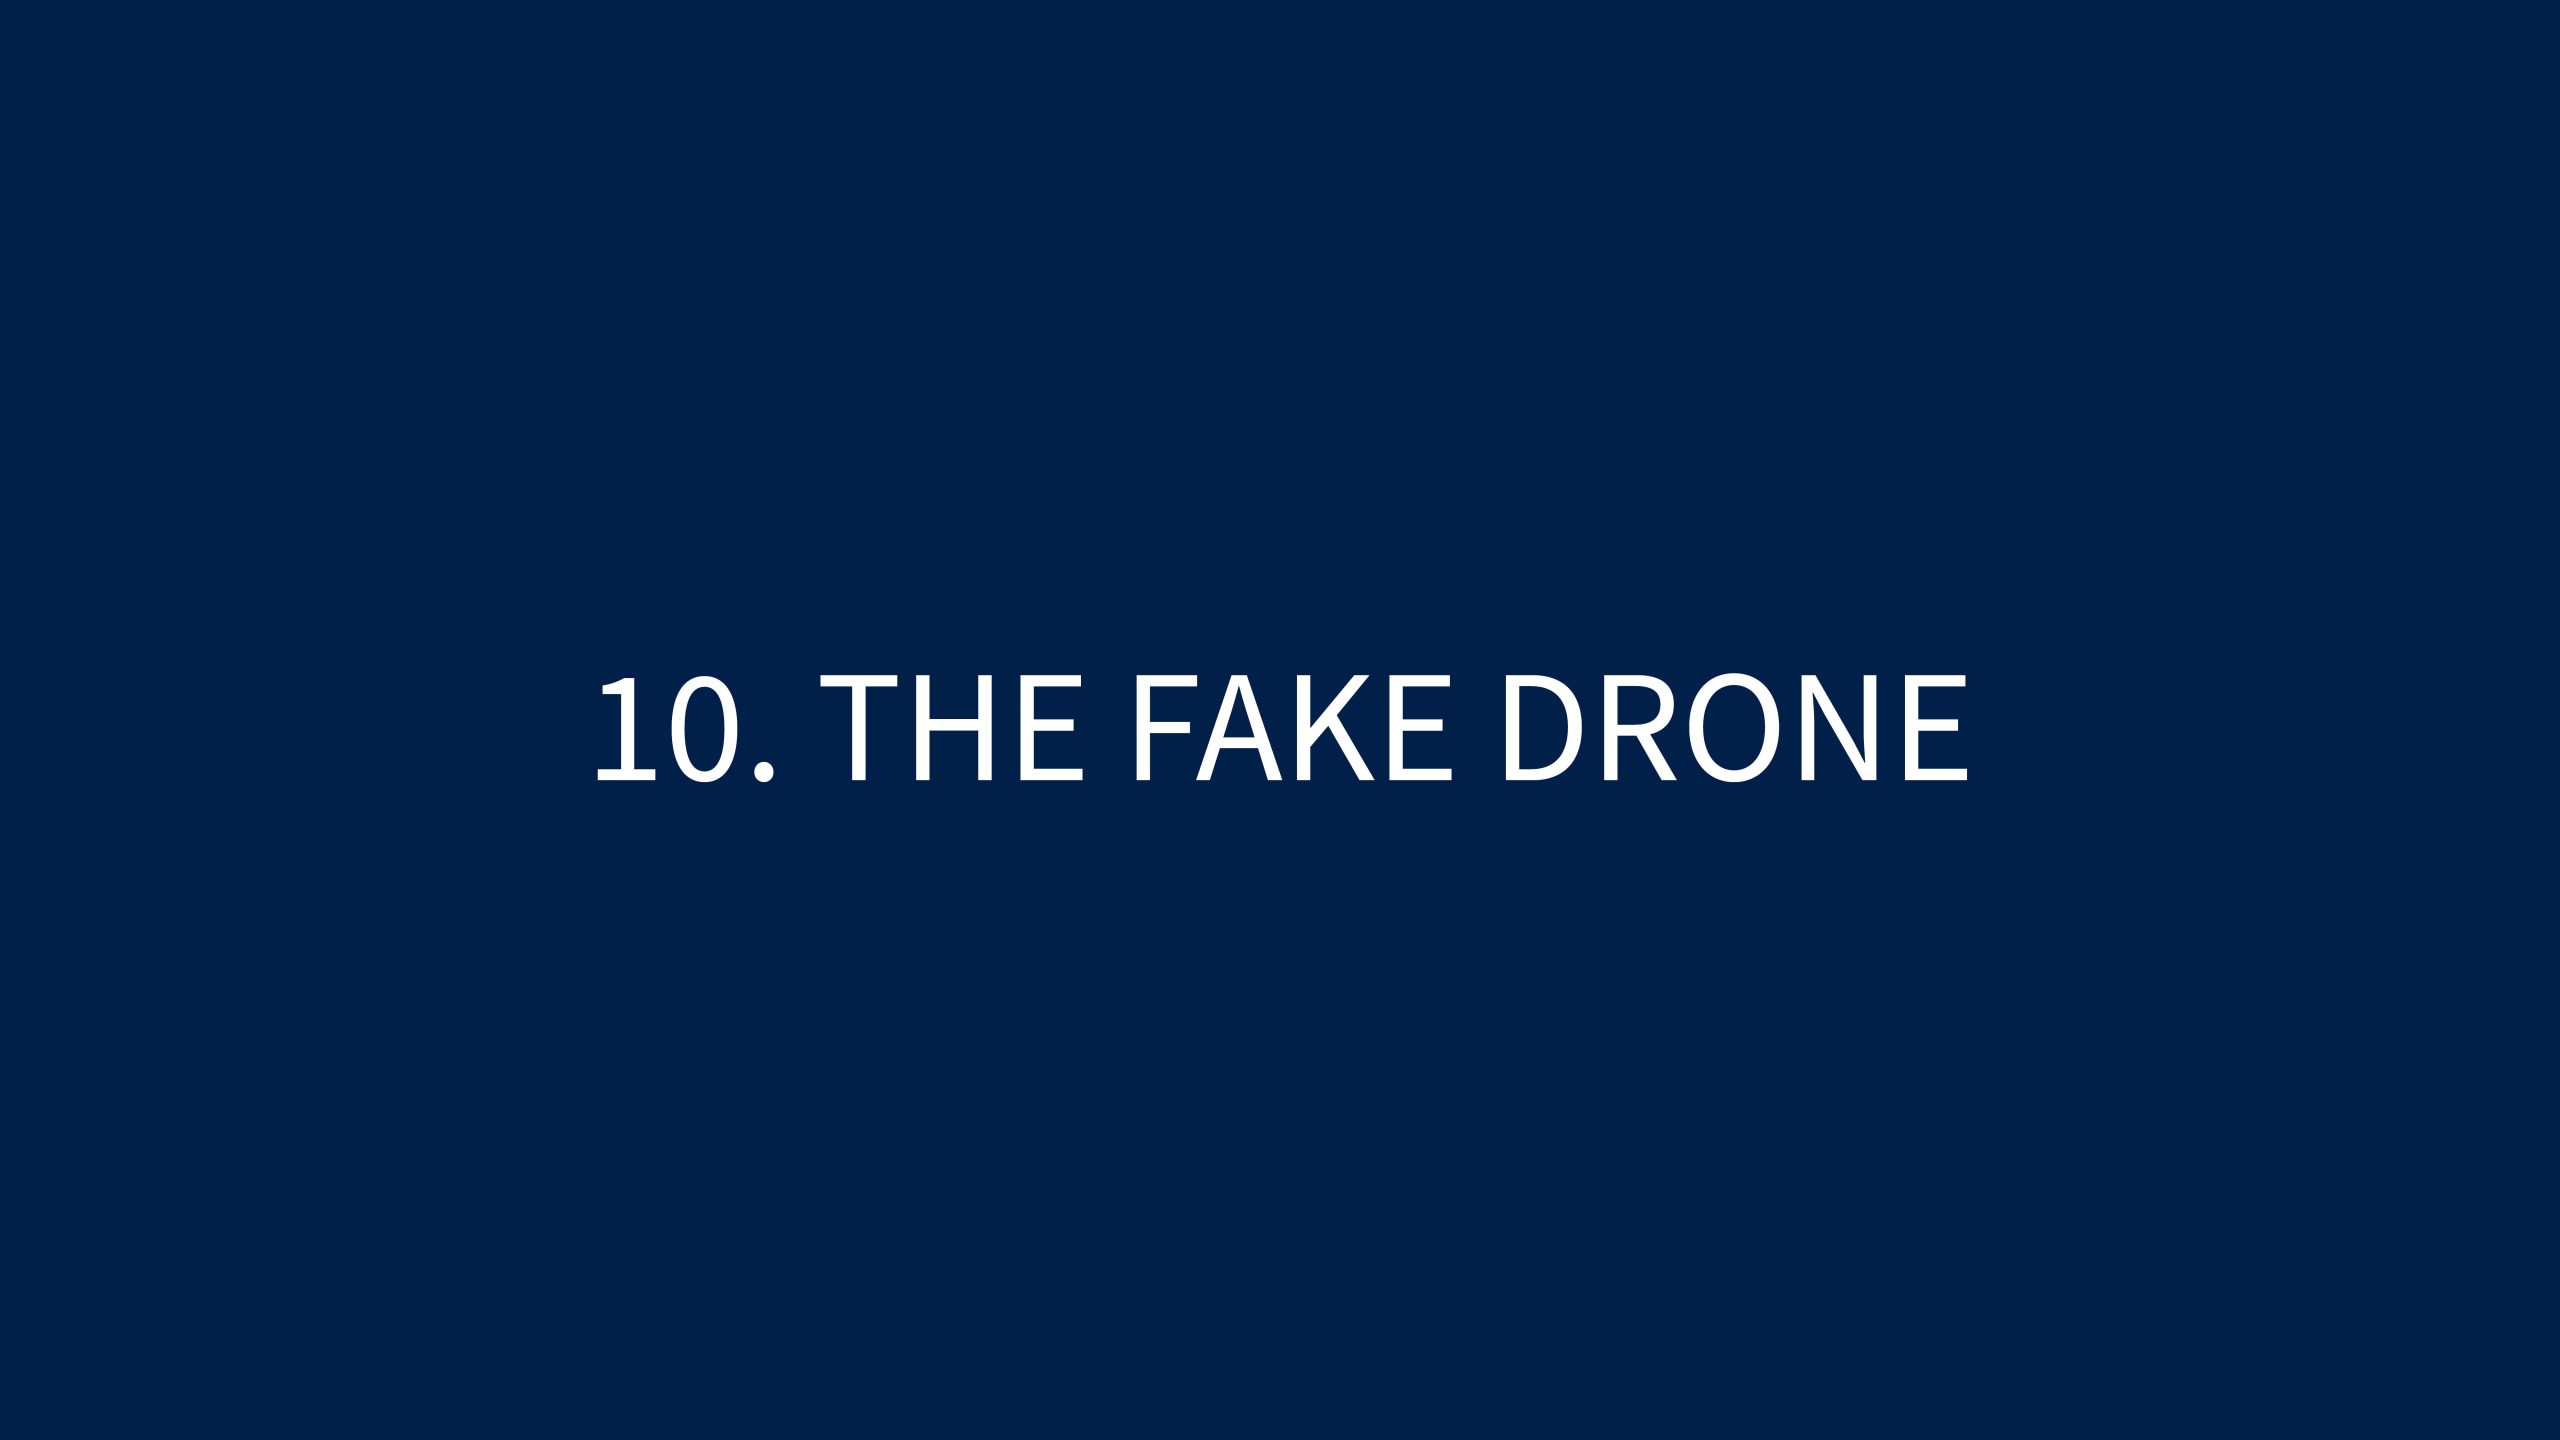 10 THE FAKE DRONE